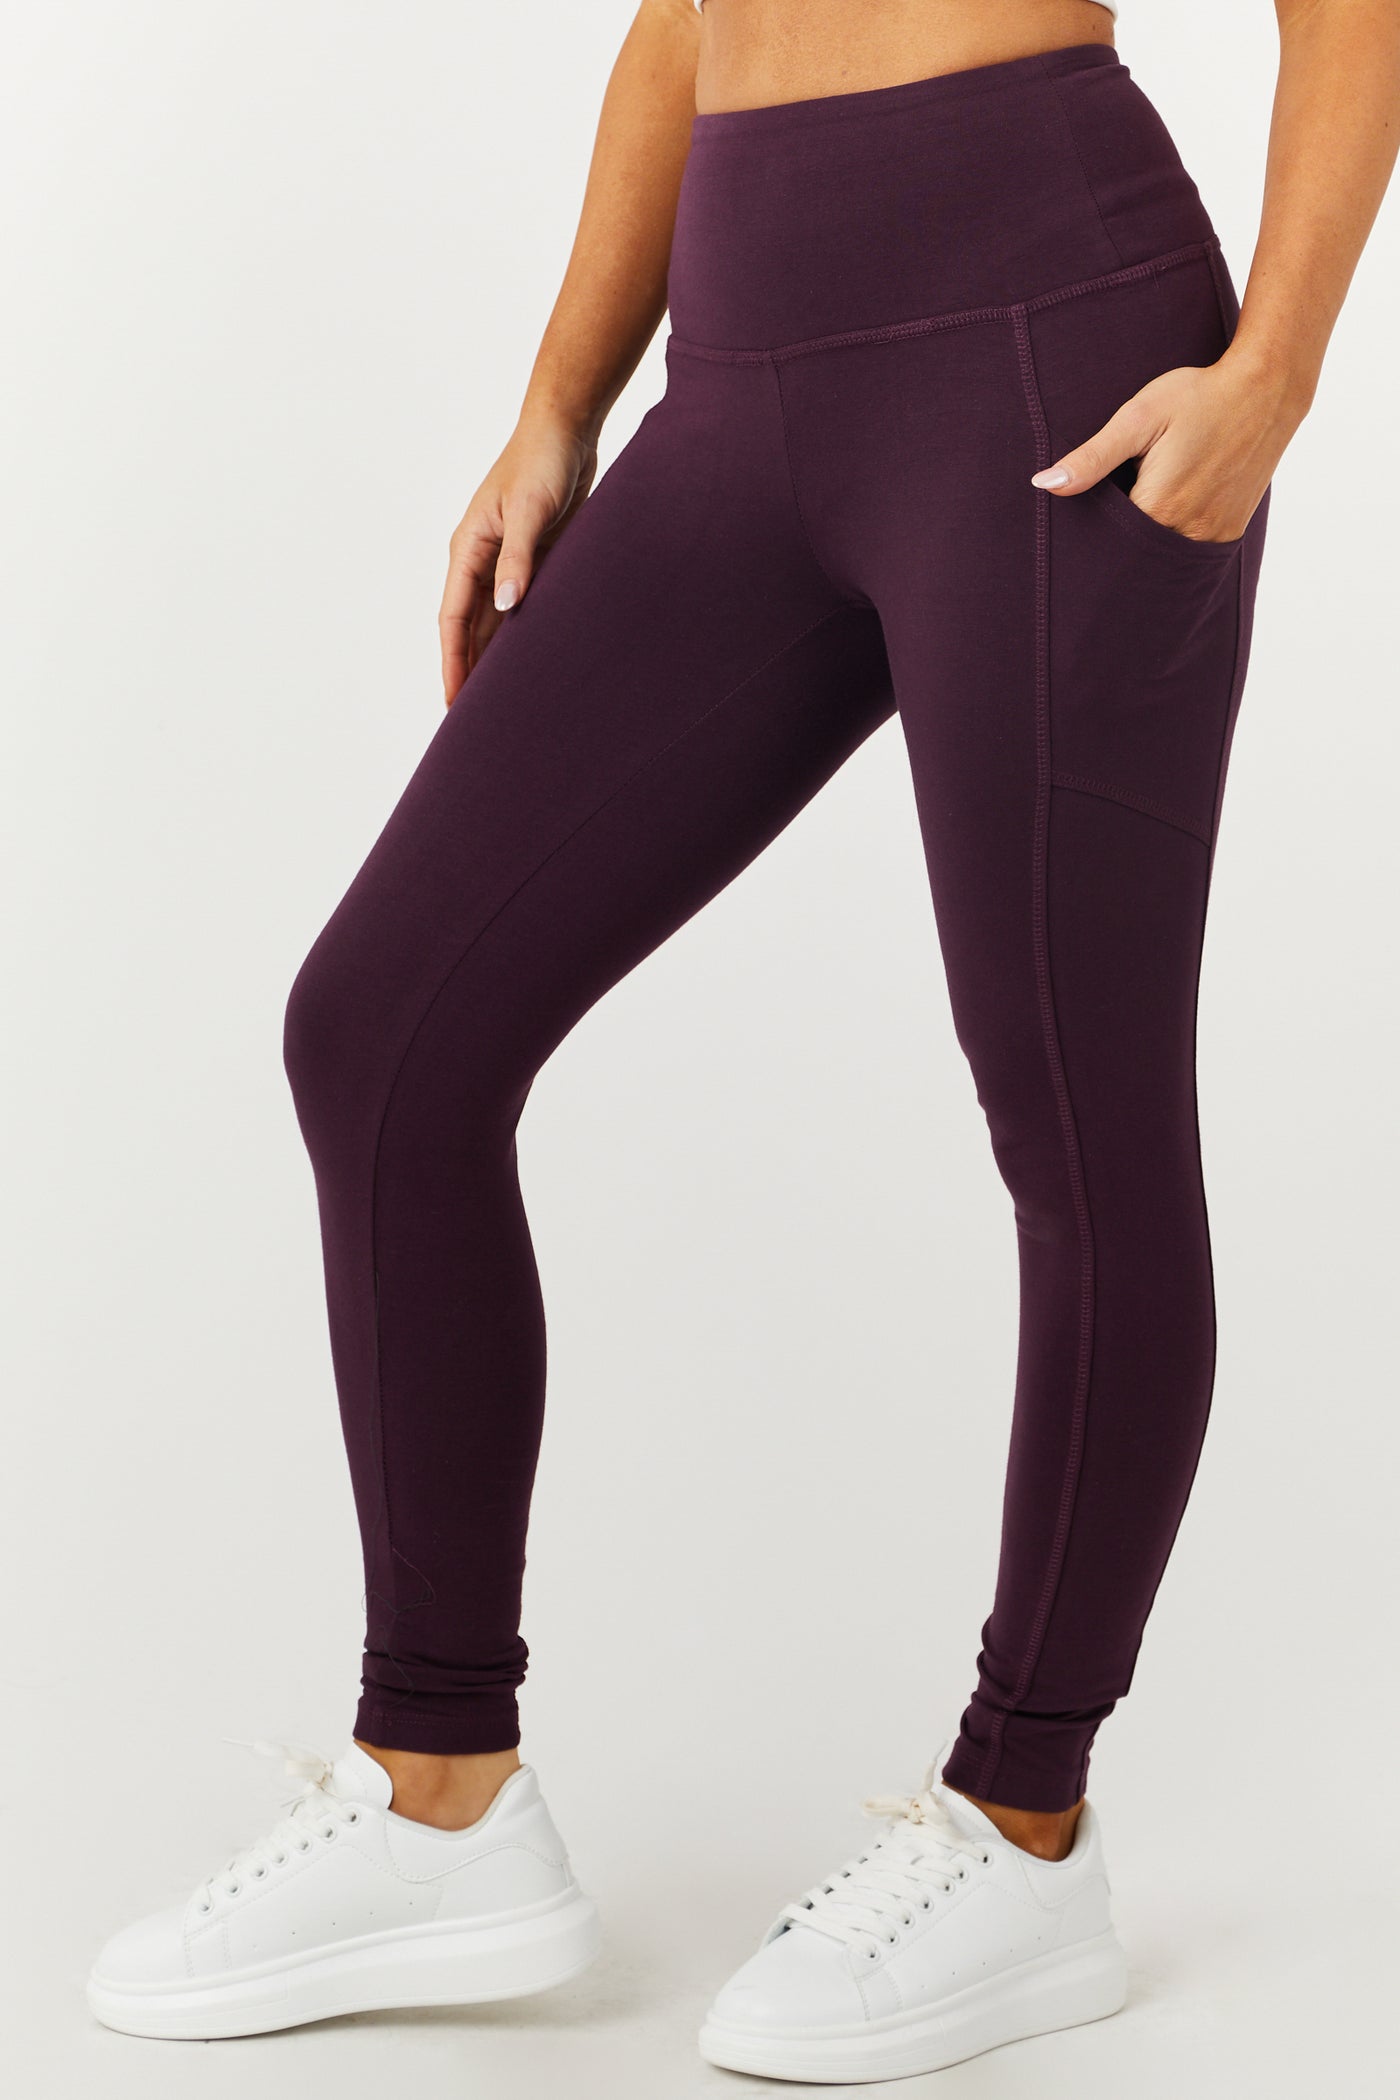 Eggplant Cotton Leggings with Pockets